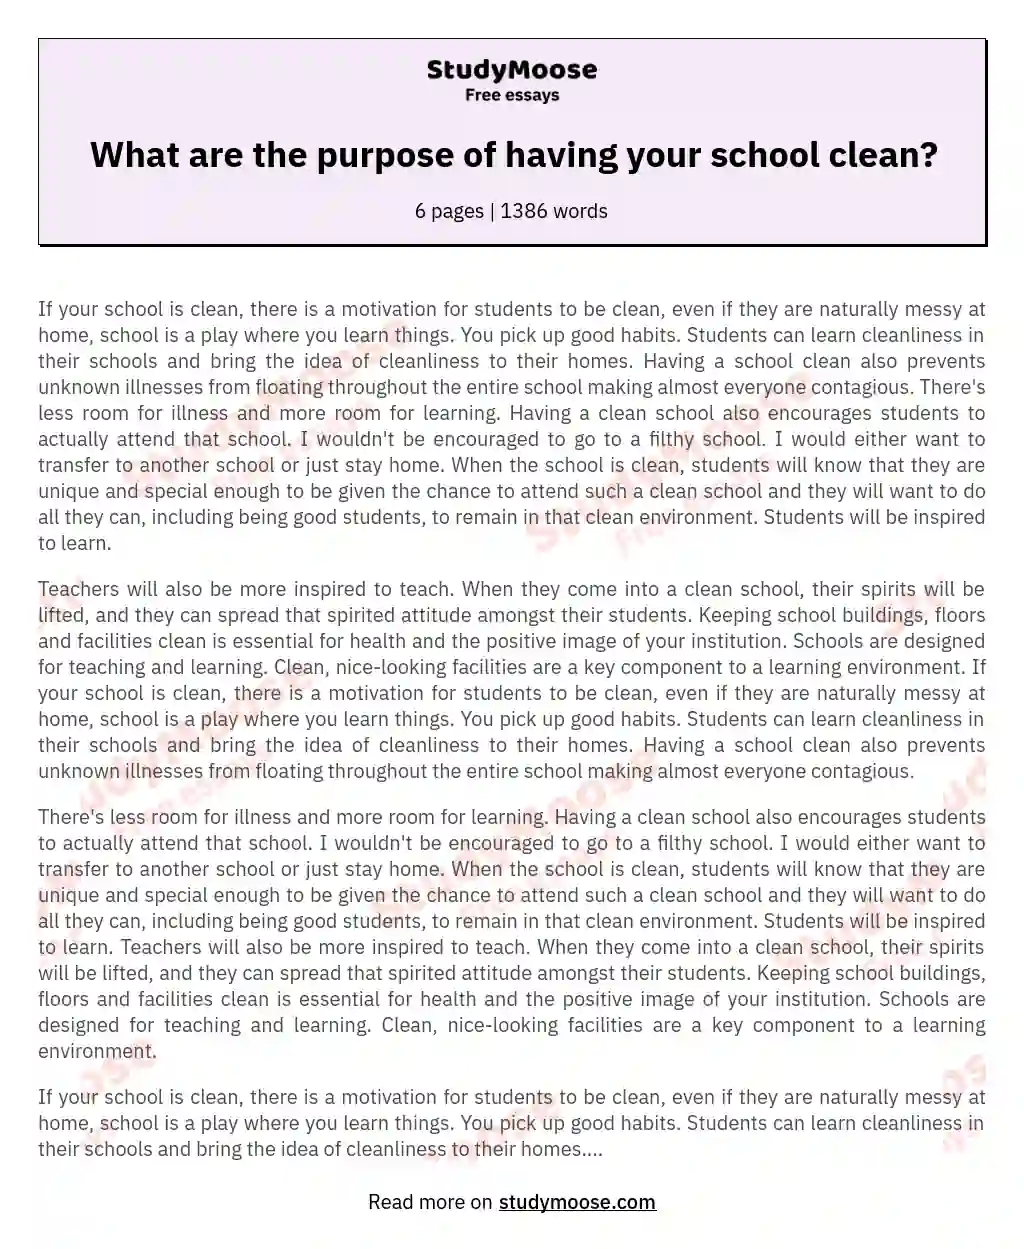 What are the purpose of having your school clean?